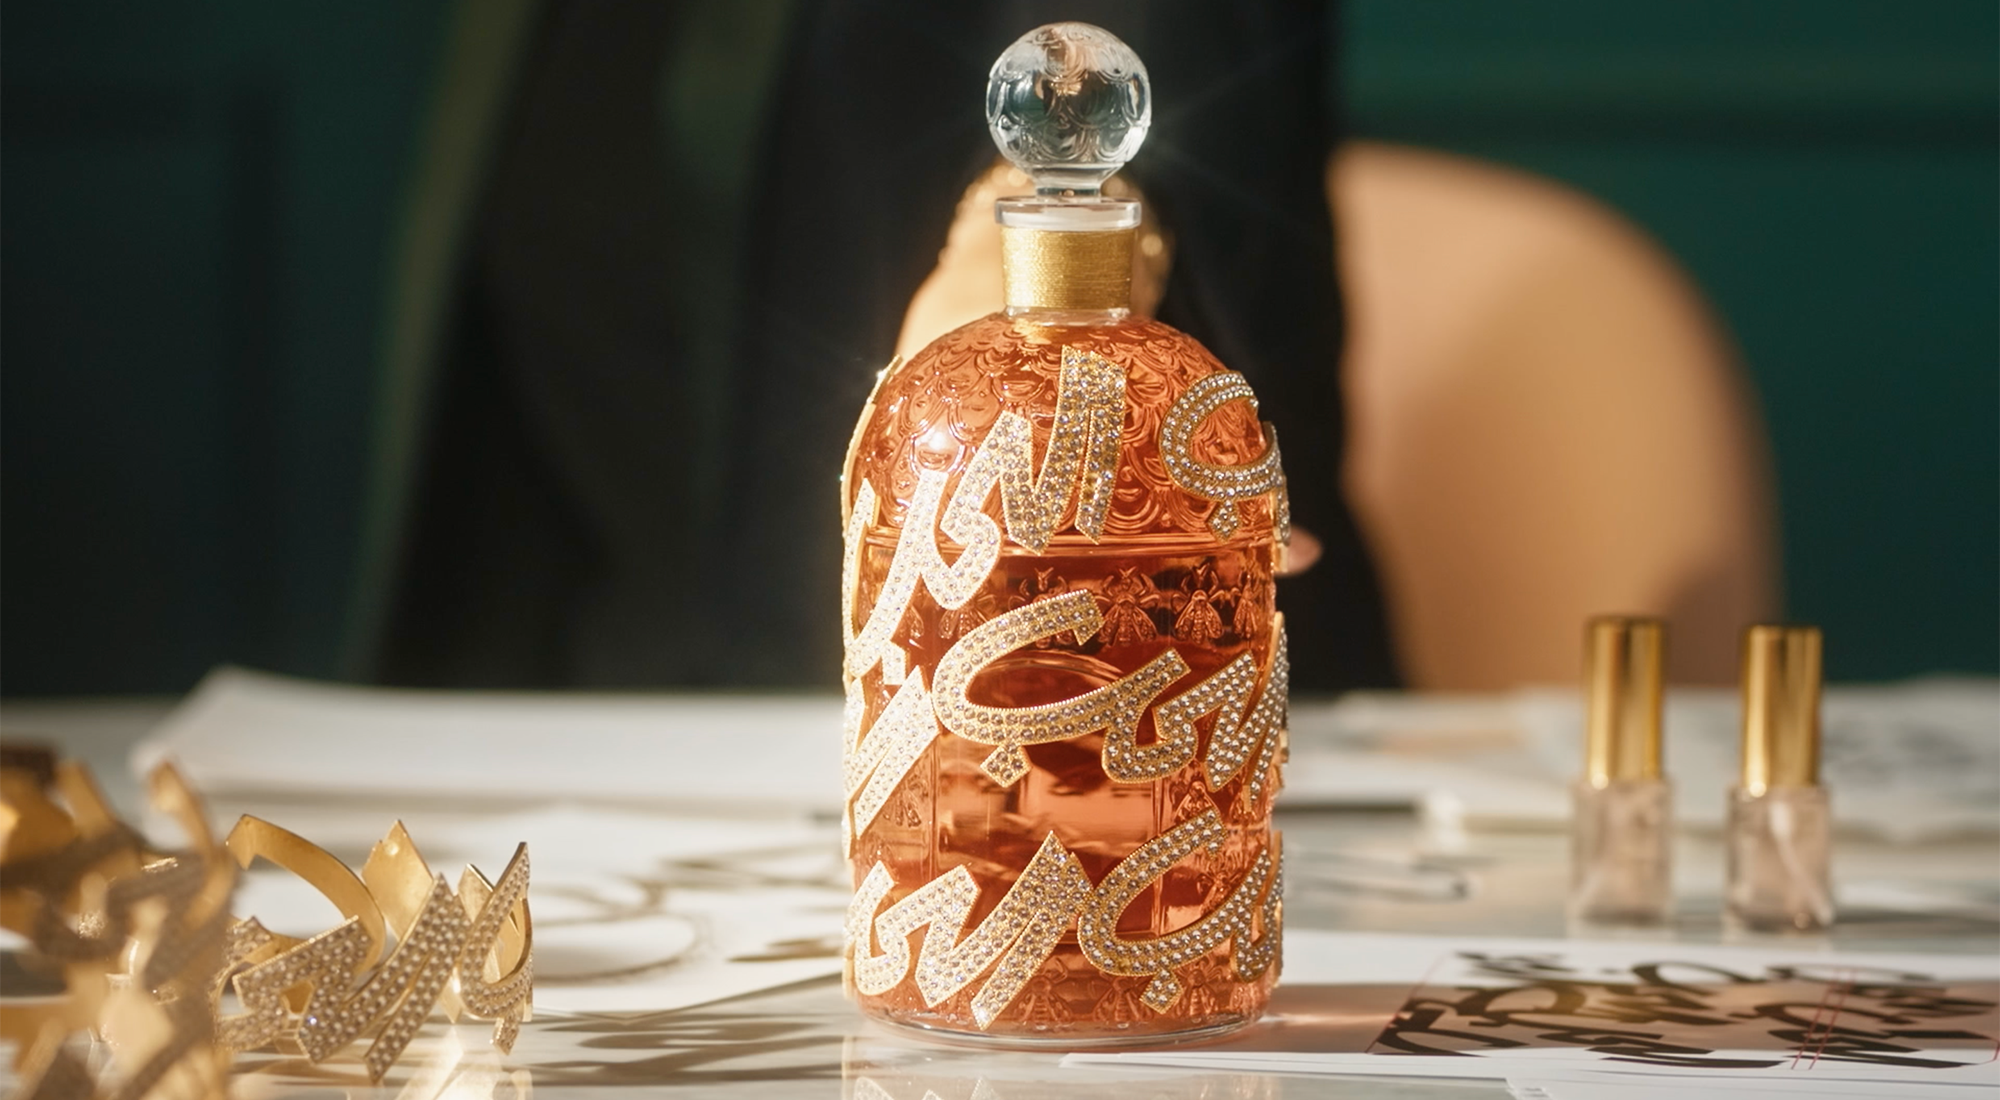 Maison Guerlain presents “Rêve d'Amour” by Nadine Kanso to celebrate 170th  anniversary of iconic Bee bottle - LVMH